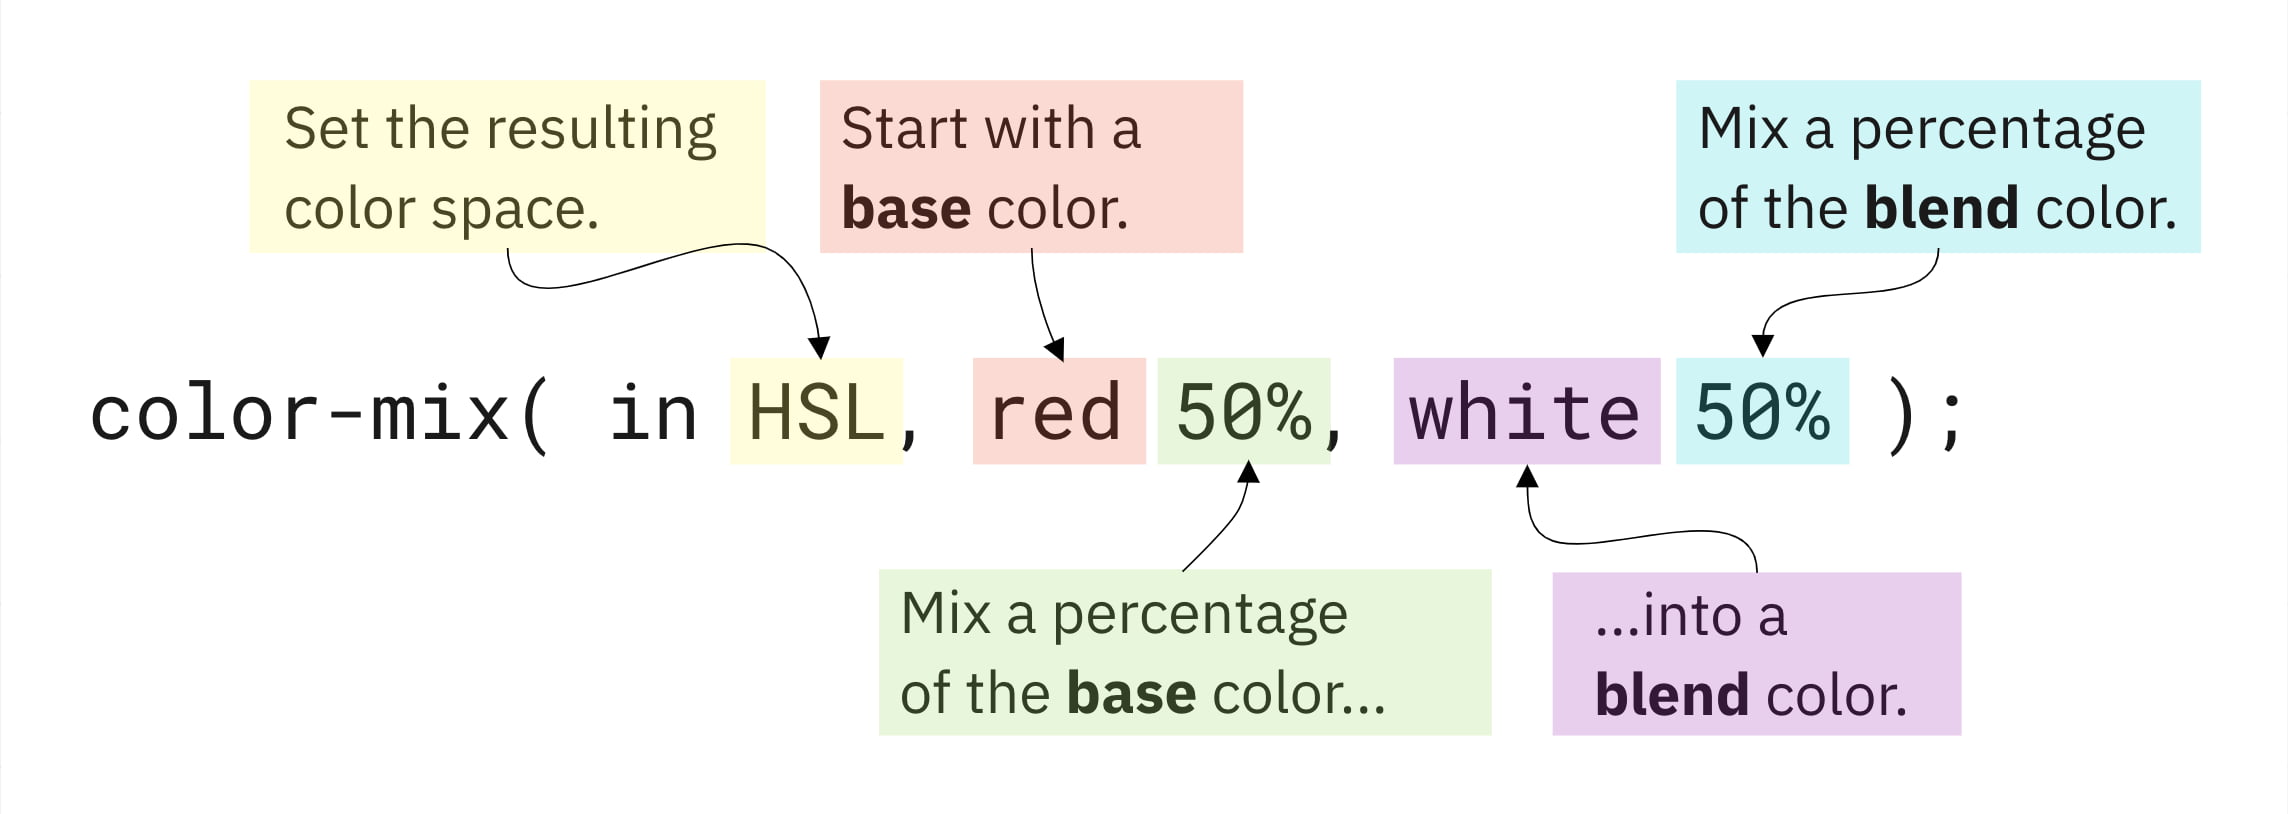 Color Mixer. CSS Color change between Sections.